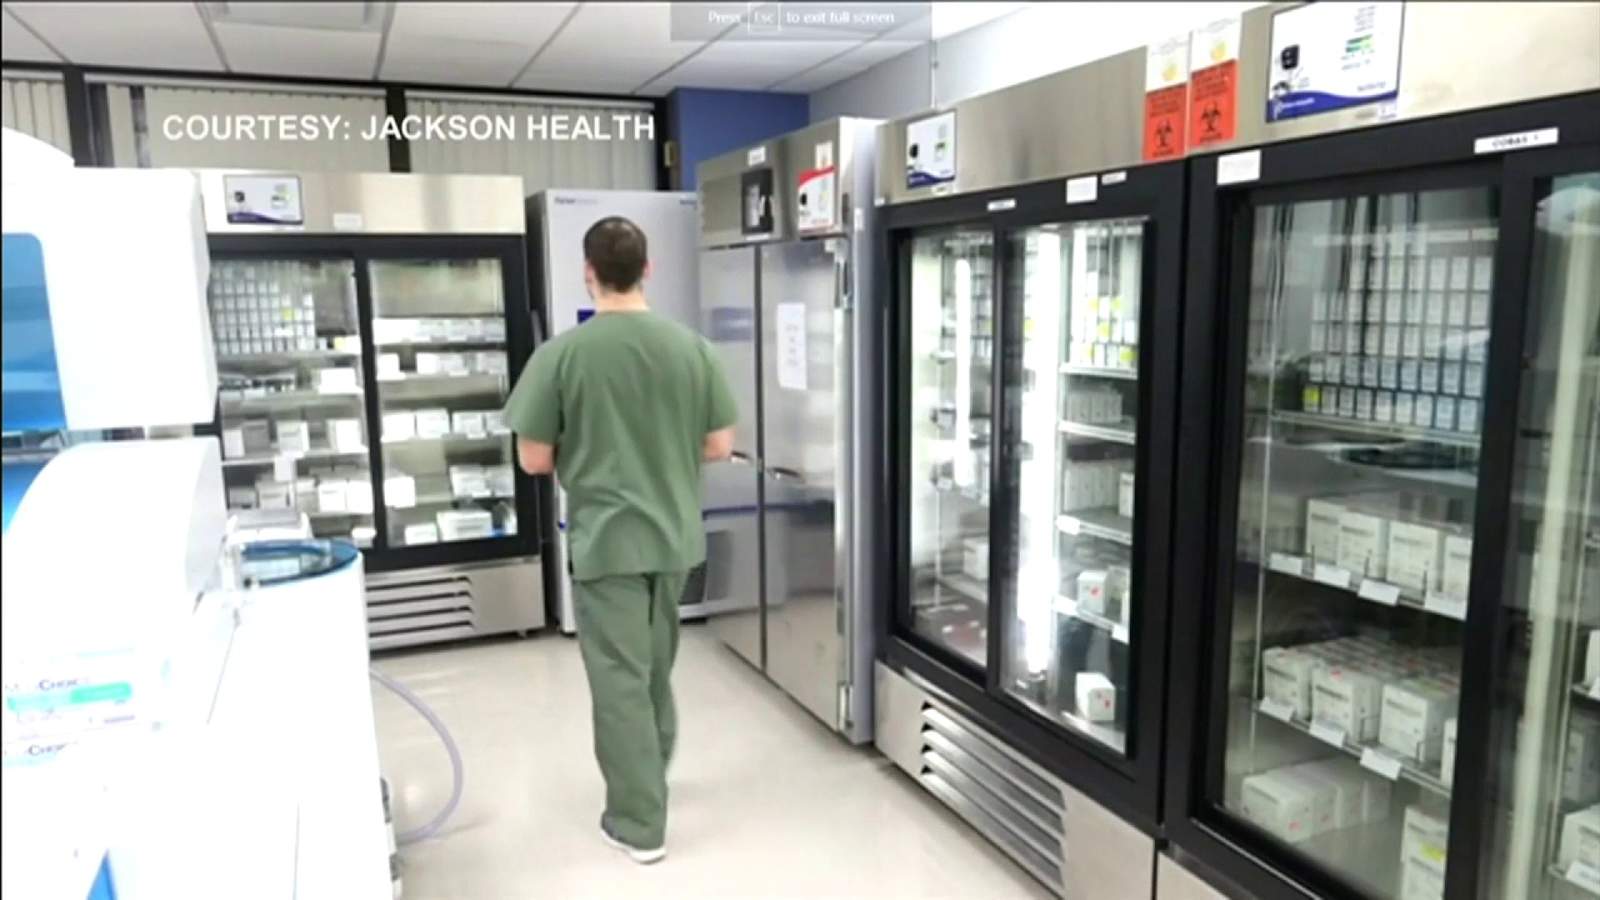 Local hospital system’s freezers ready and waiting for COVID-19 vaccine